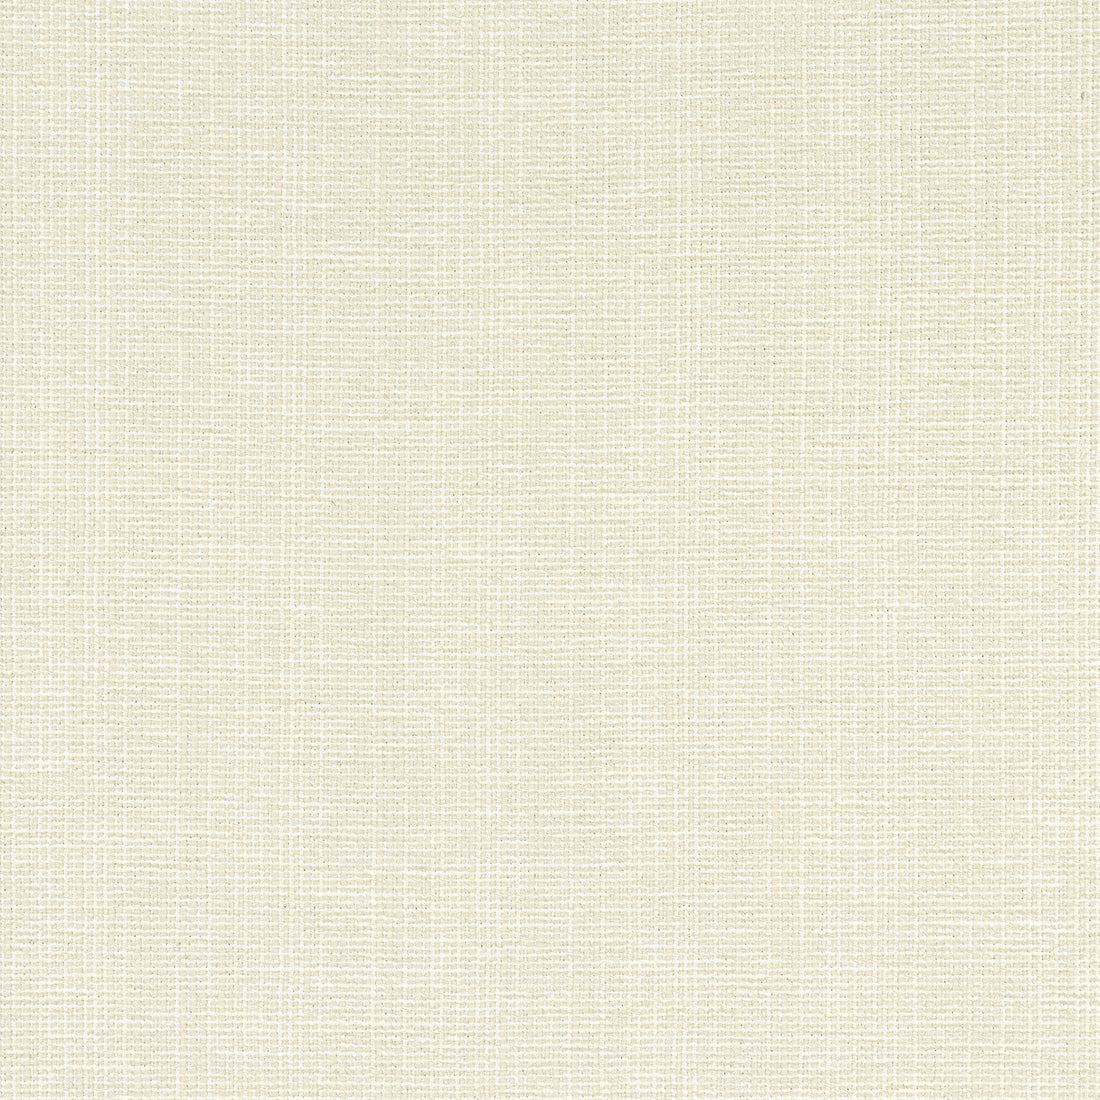 Sacchi fabric in parchment color - pattern number W8753 - by Thibaut in the Haven Textures collection